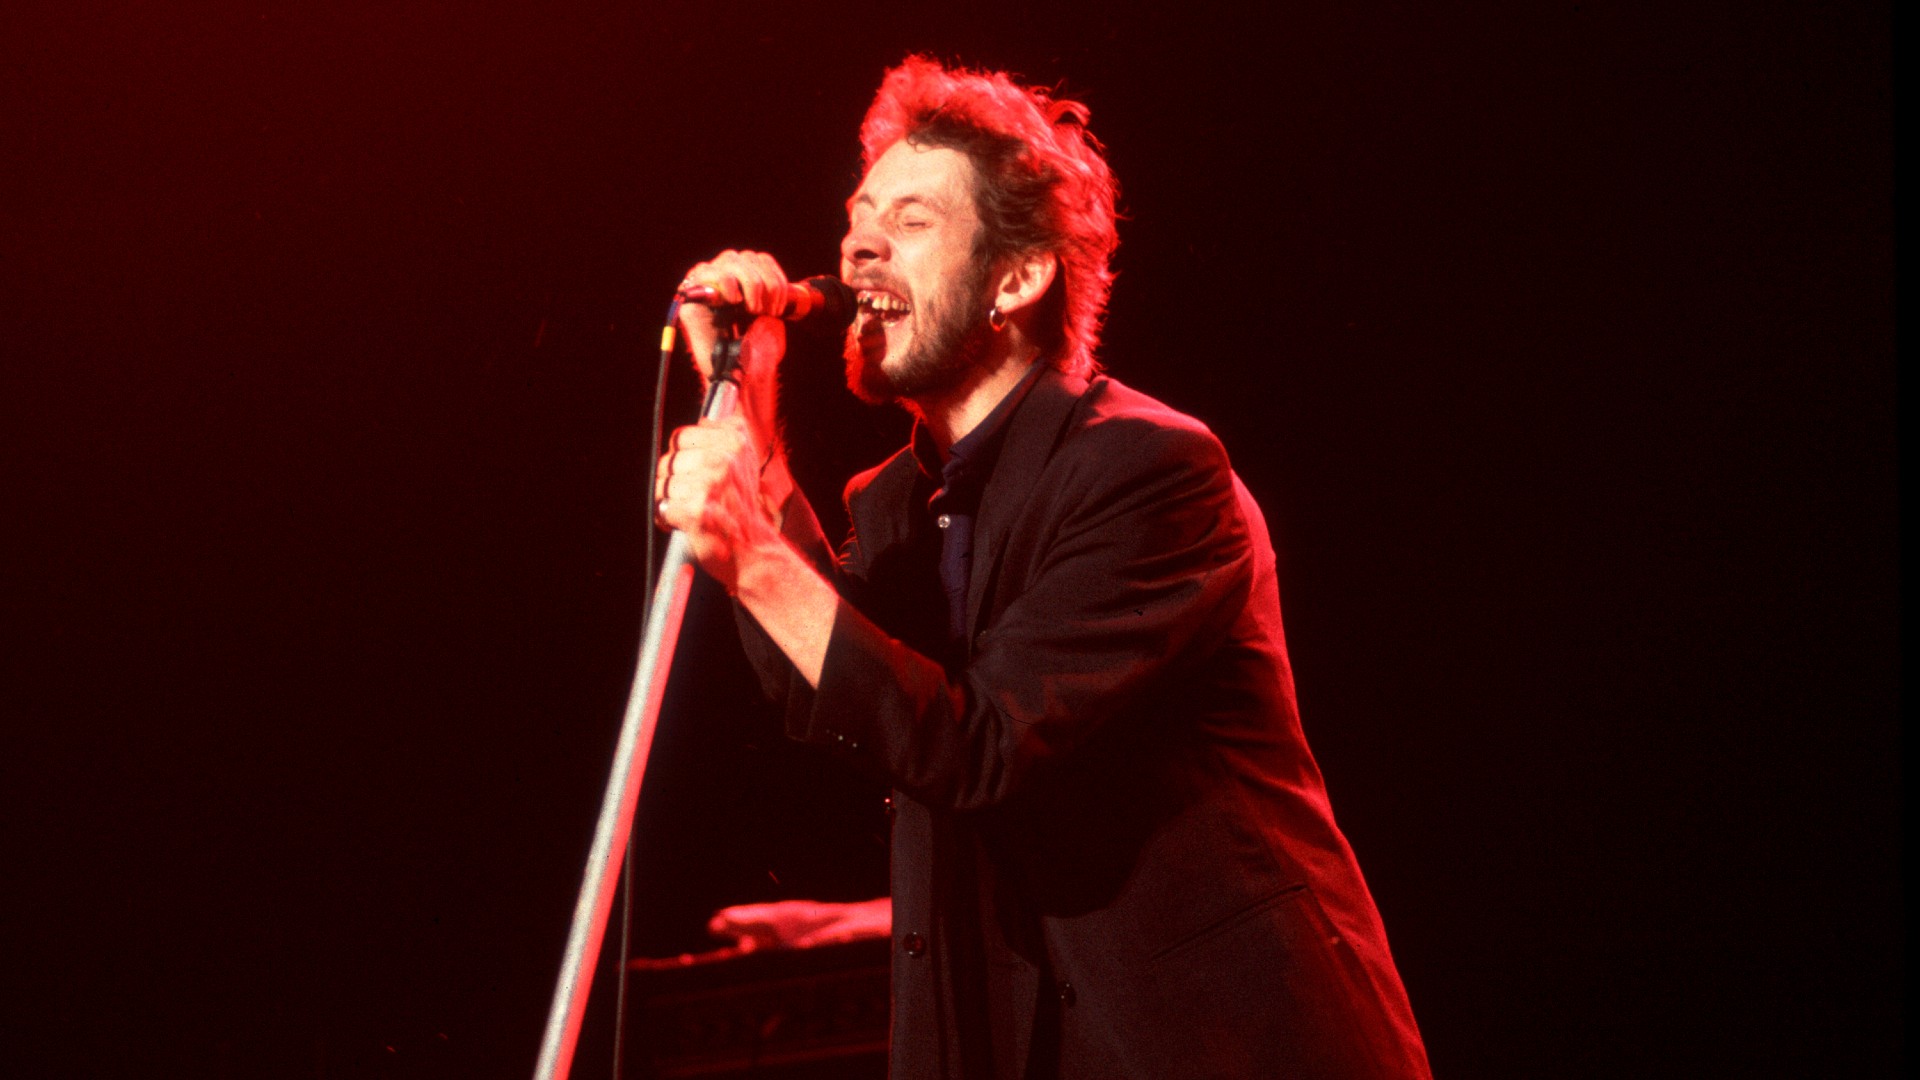 Shane MacGowan, lead singer of The Pogues, dies at 65